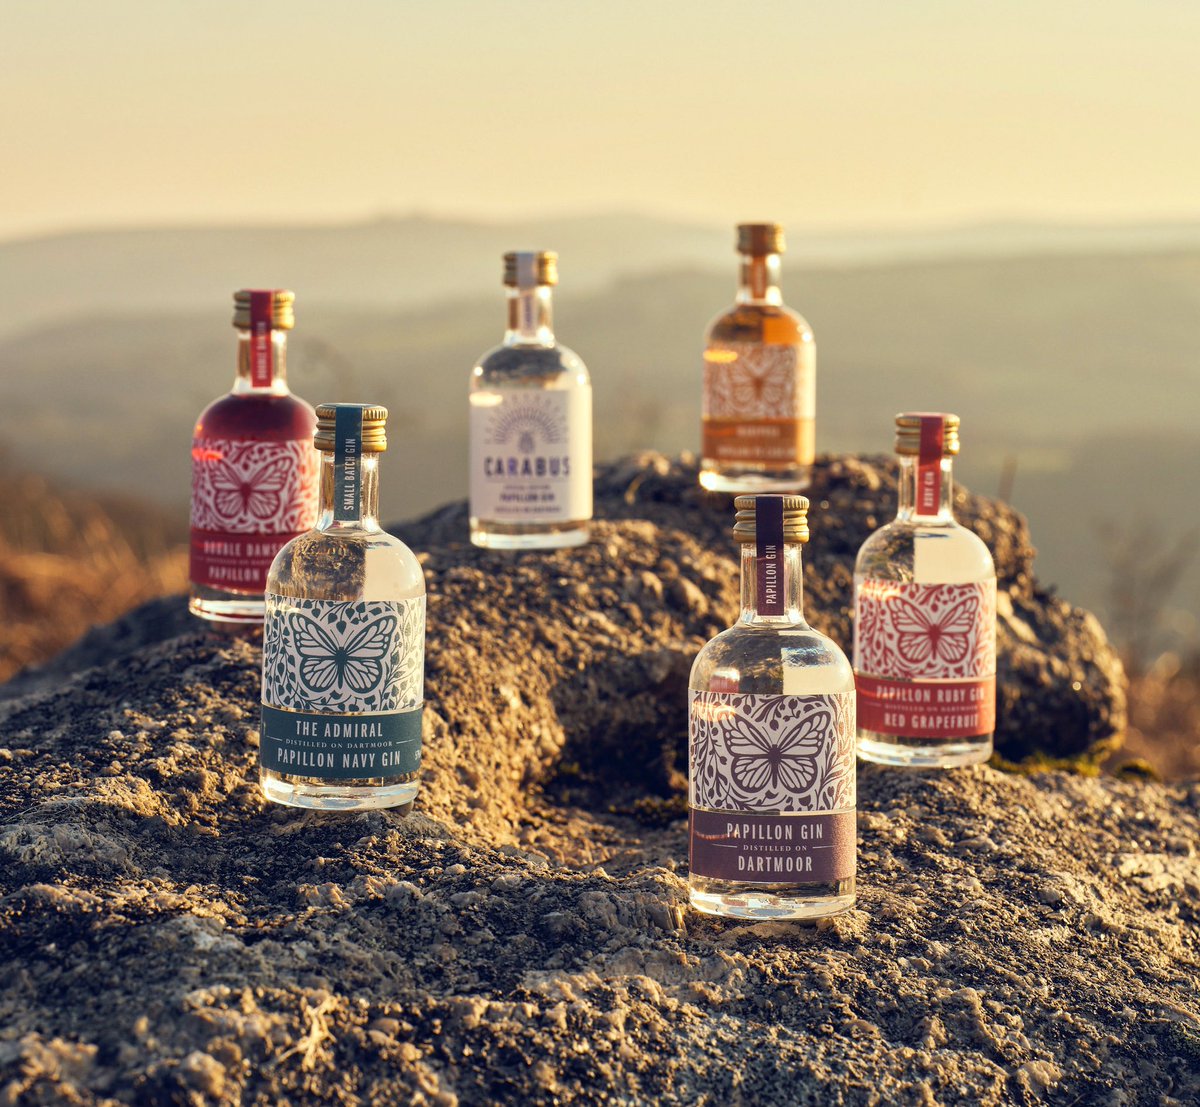 If you’re not sure which of our gins you’d prefer, why not try a #miniature 

#ginadaymay @gin_a_ding_ding #papillongin #distilledondartmoor #dartmoor #gin #ginminiatures